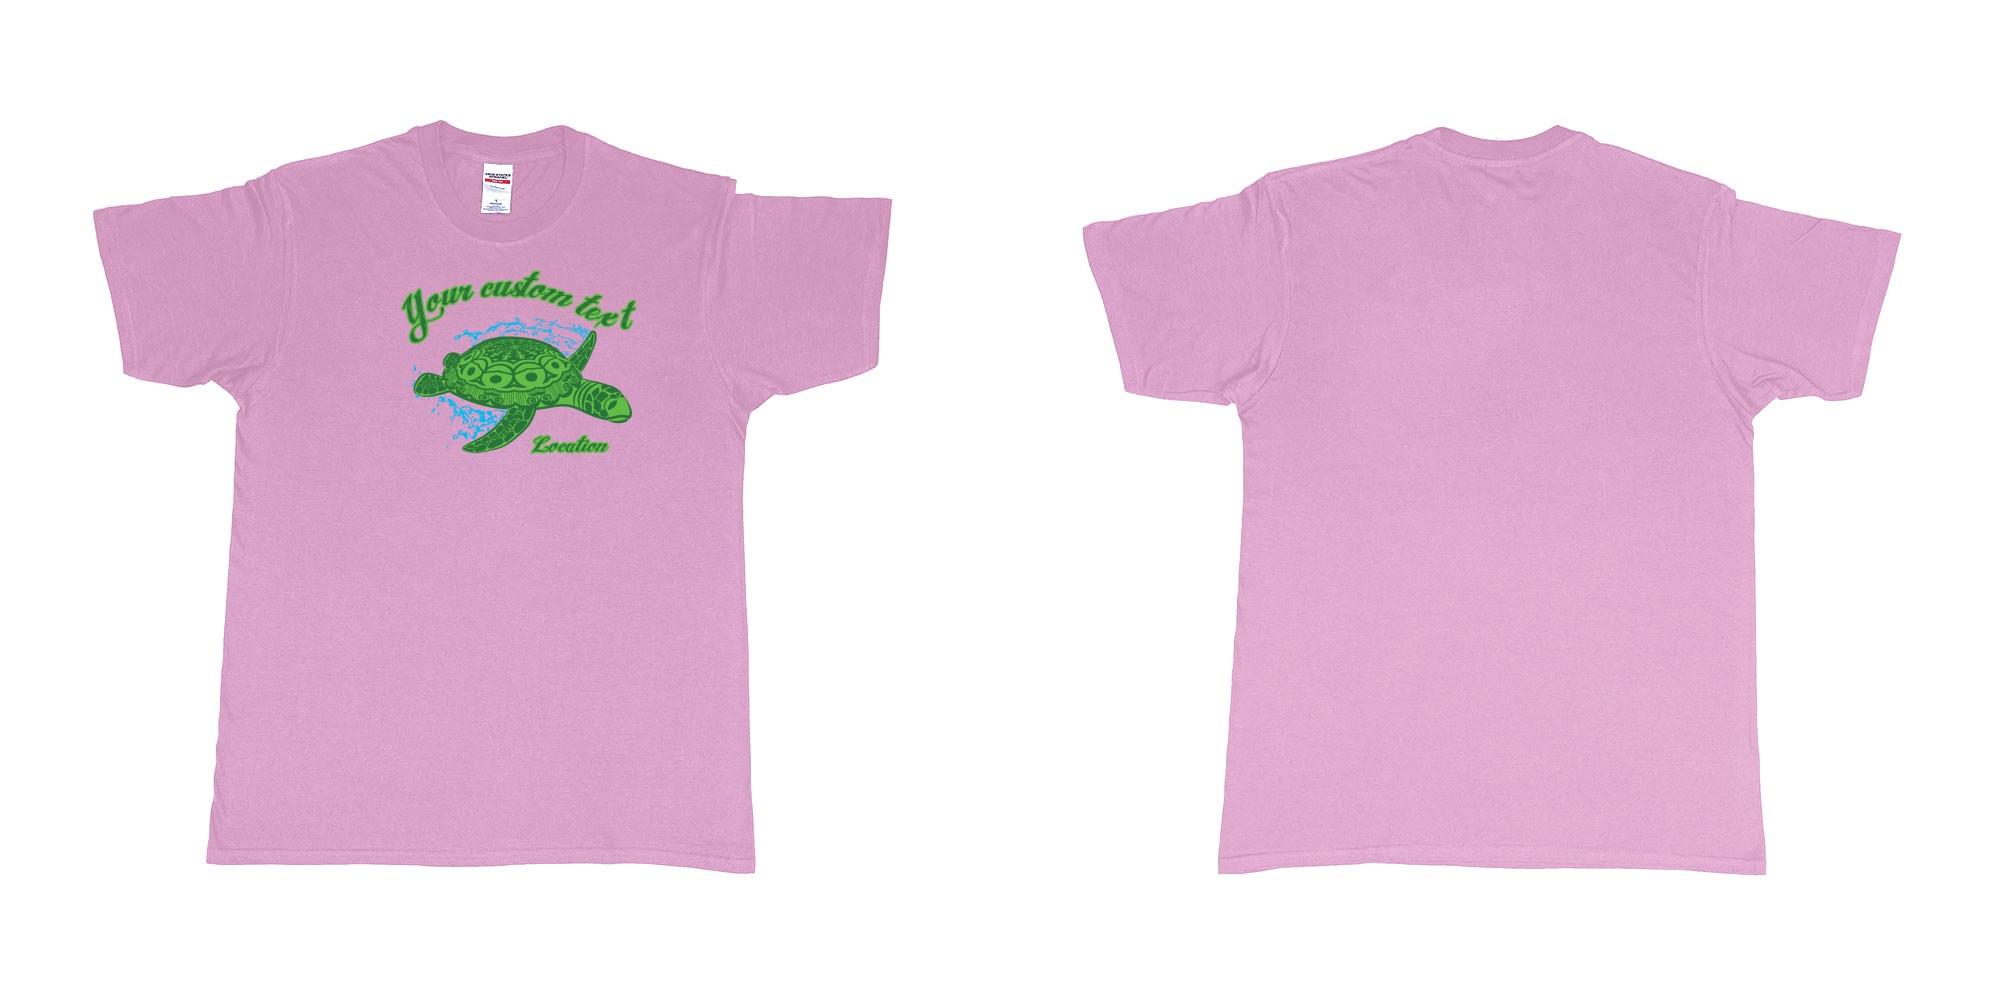 Custom tshirt design turtle swimming design bali in fabric color light-pink choice your own text made in Bali by The Pirate Way